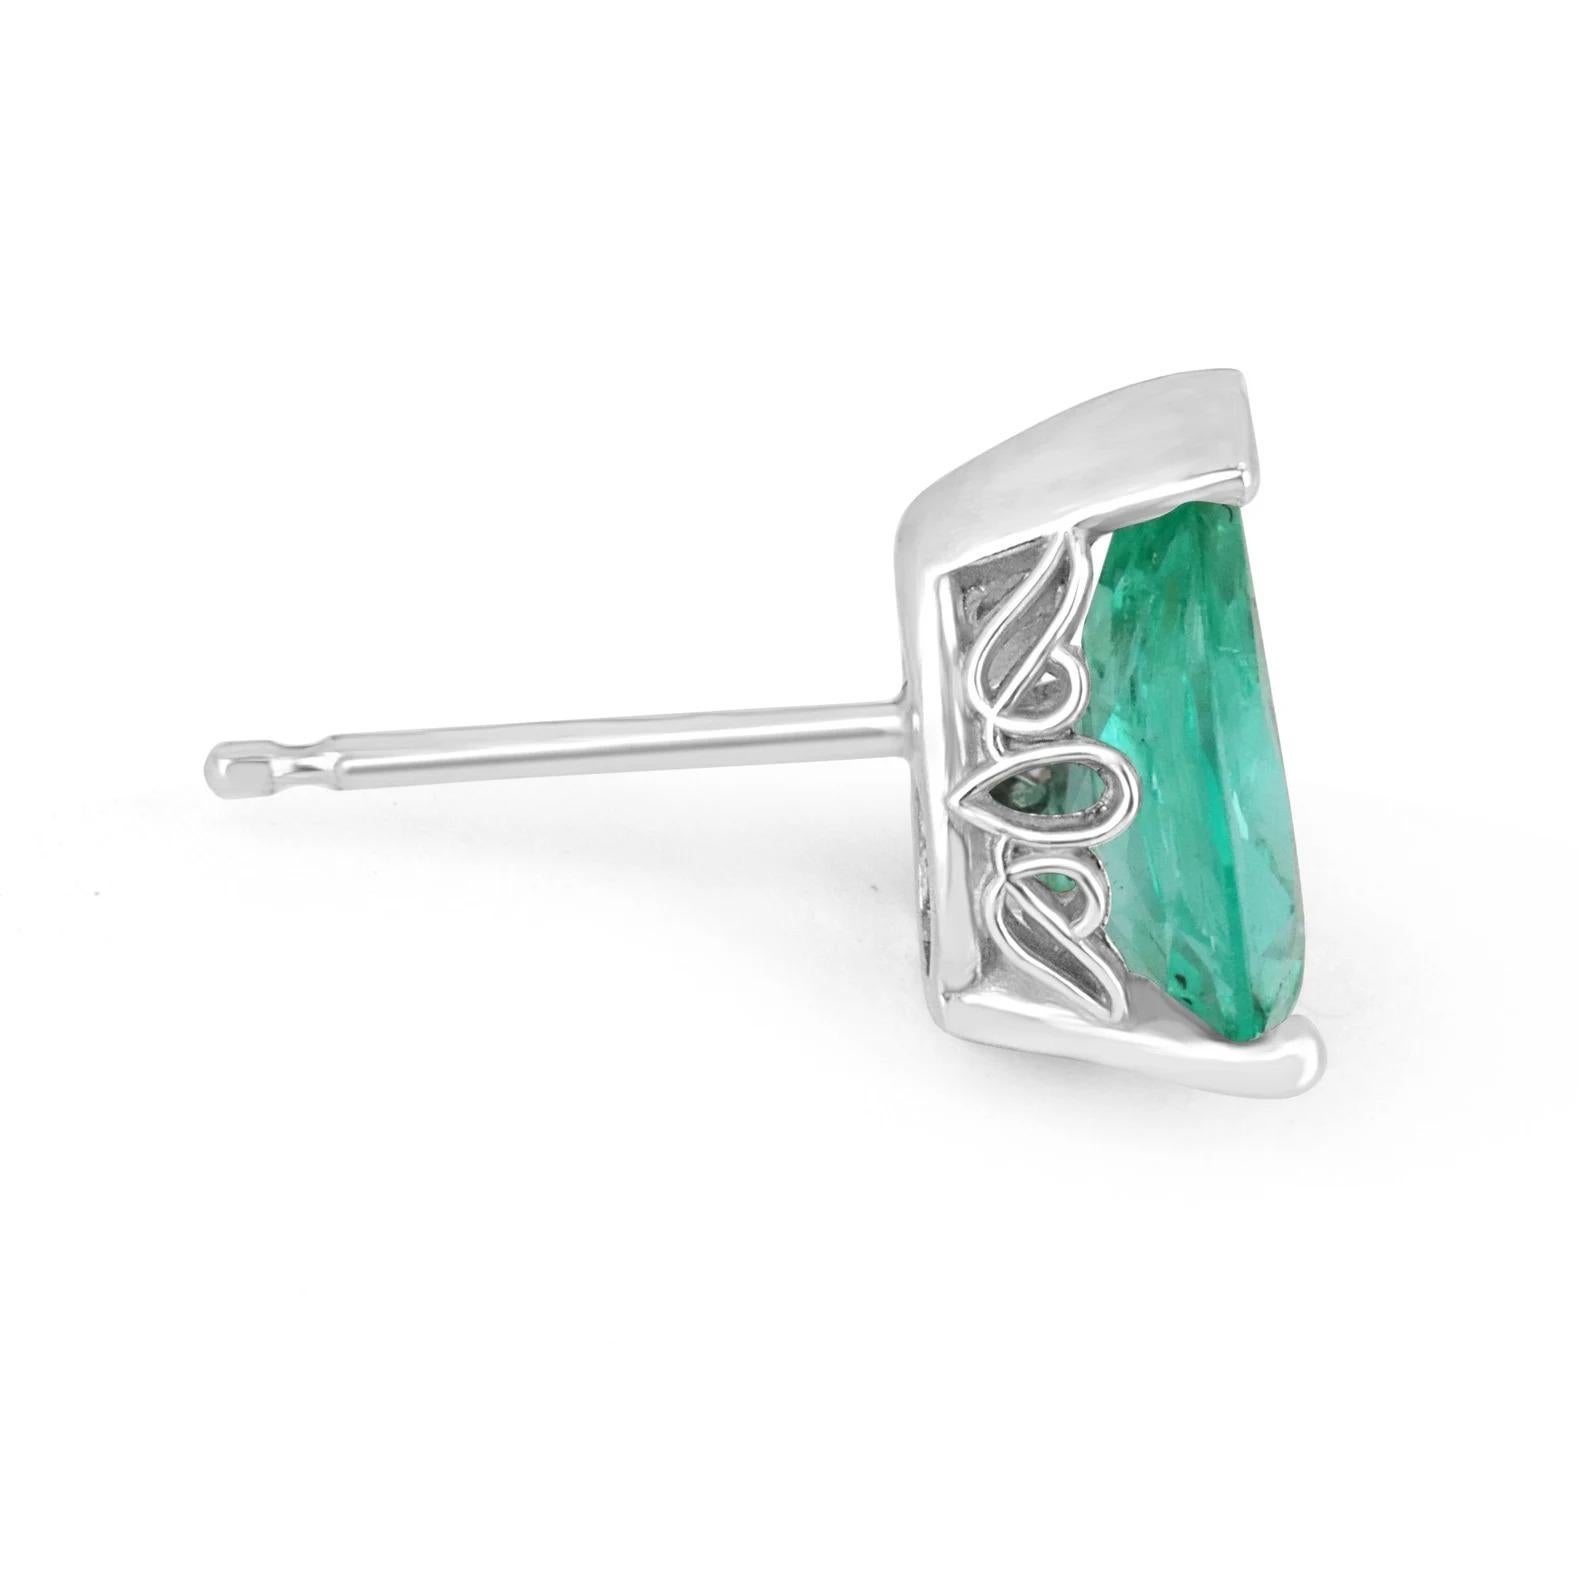 Displayed are a beautiful set of teardrop emerald studs in 14K white gold. The emeralds are genuine, earth-mined gems. These emeralds have excellent eye clarity, any small imperfections are normal. Sorting emeralds with matching qualities is very